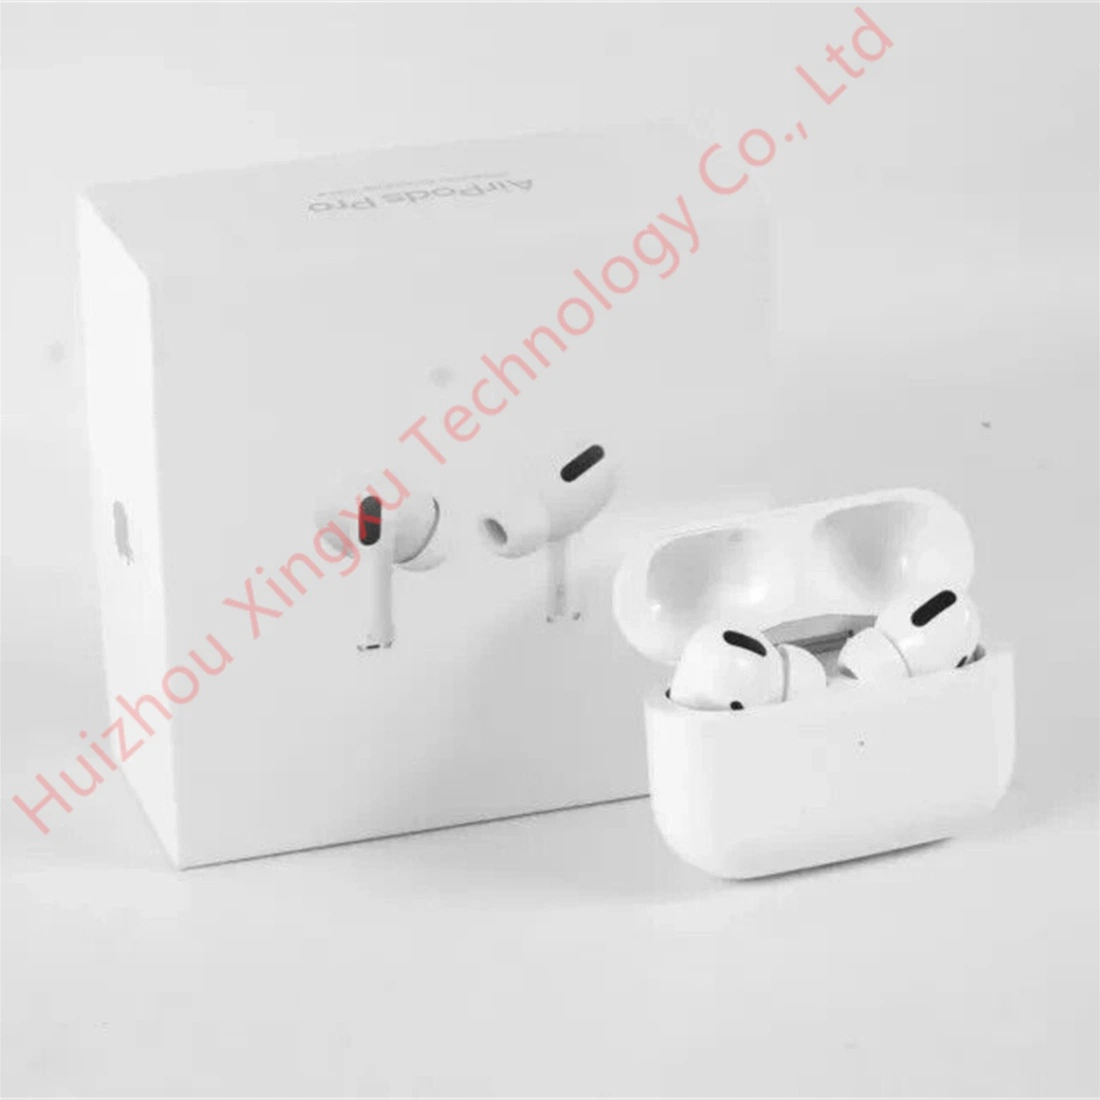 in-Ear Wireless Bluetooth V5.0 Earphones as Mobile Phone Accessories